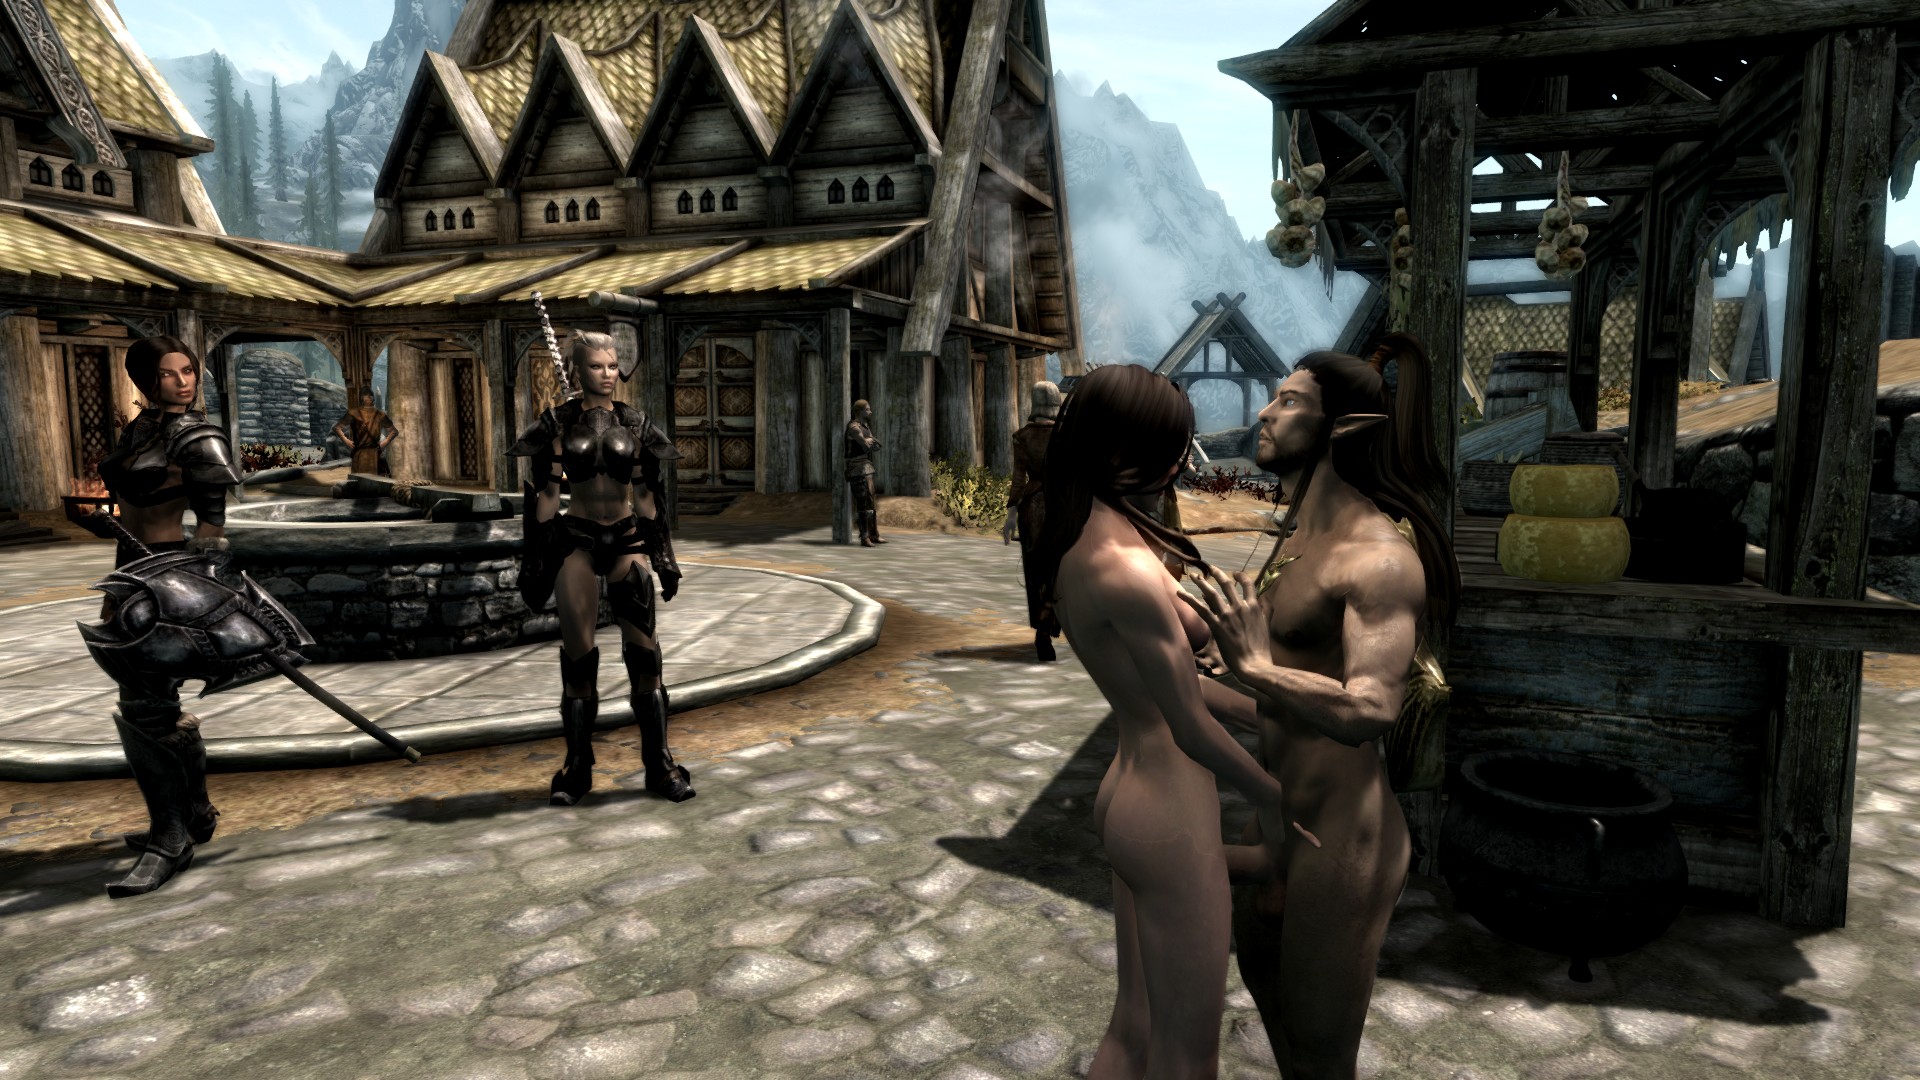 Skyrim as long as you can have sex though and mods are added.